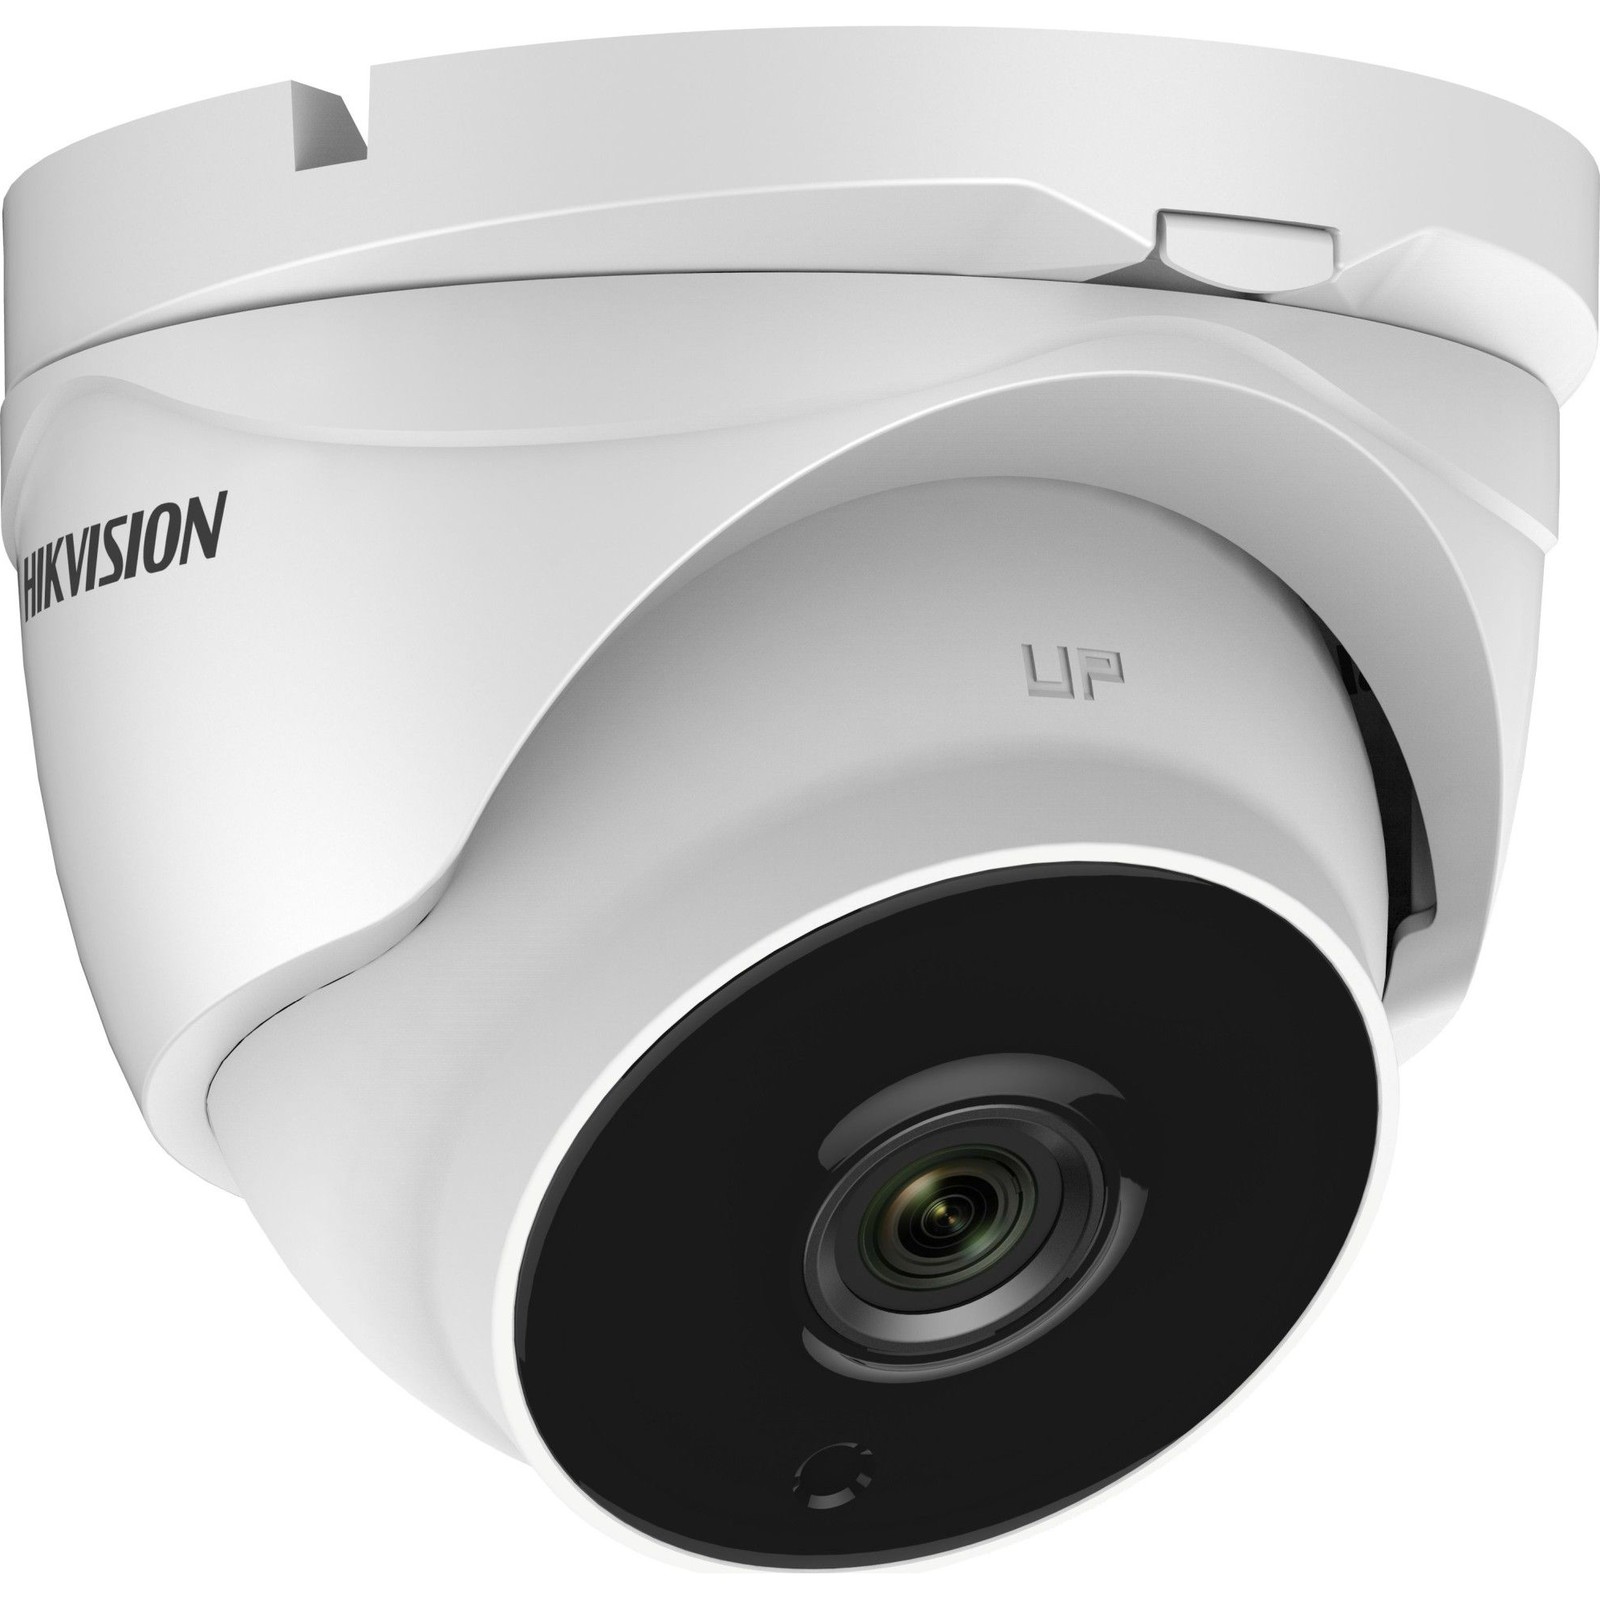 You Recently Viewed Hikvision DS-2CE56D8T-IT3ZE 2MP External Turret Camera Image